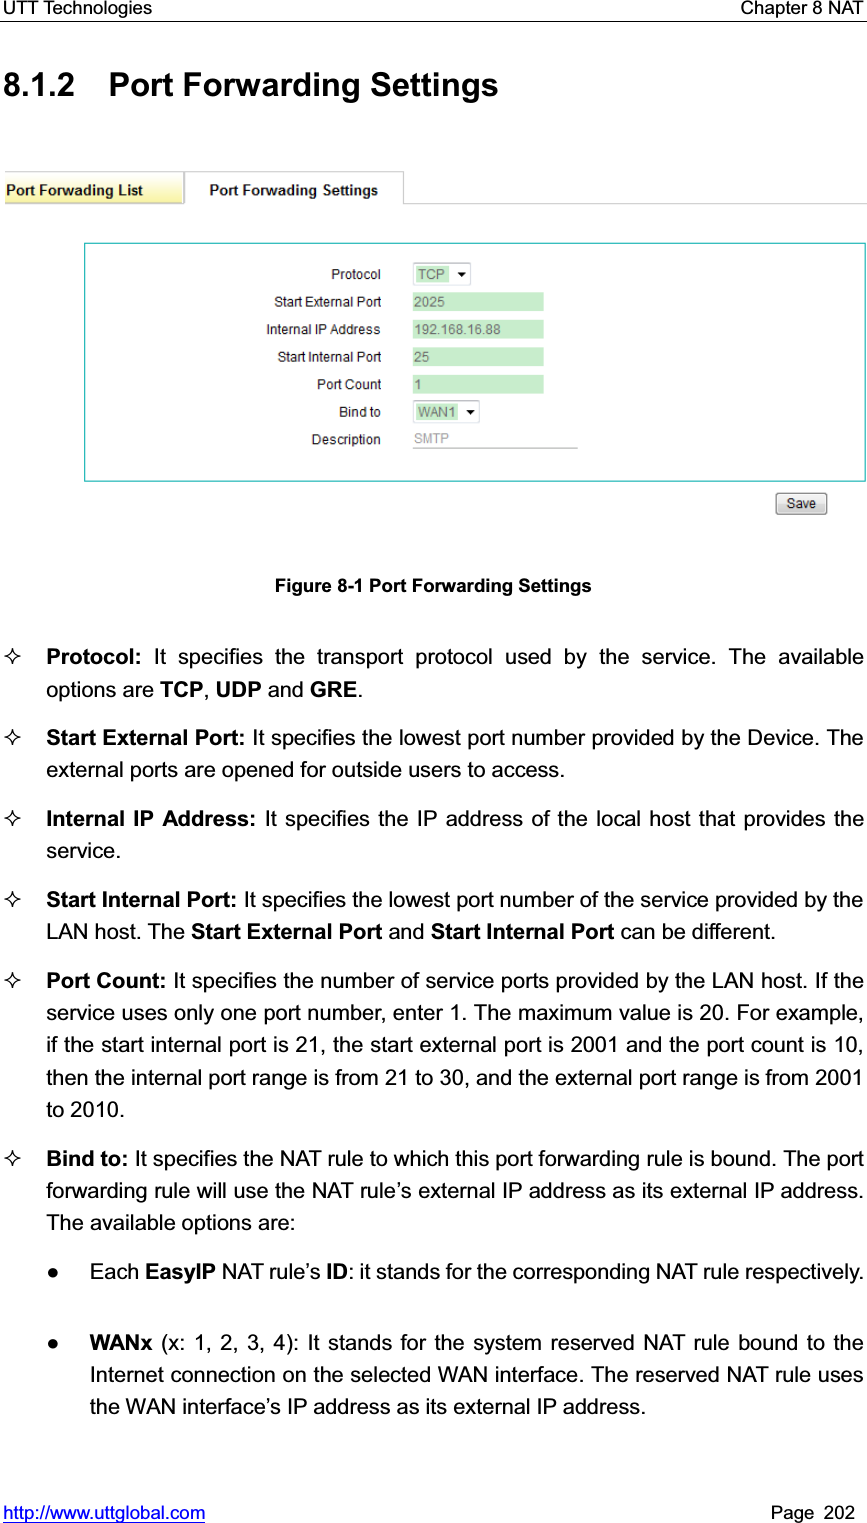 UTT Technologies    Chapter 8 NAT   http://www.uttglobal.com Page 202 8.1.2  Port Forwarding Settings Figure 8-1 Port Forwarding Settings Protocol: It specifies the transport protocol used by the service. The available options are TCP,UDP and GRE.Start External Port: It specifies the lowest port number provided by the Device. The external ports are opened for outside users to access.   Internal IP Address: It specifies the IP address of the local host that provides the service. Start Internal Port: It specifies the lowest port number of the service provided by the LAN host. The Start External Port and Start Internal Port can be different. Port Count: It specifies the number of service ports provided by the LAN host. If the service uses only one port number, enter 1. The maximum value is 20. For example, if the start internal port is 21, the start external port is 2001 and the port count is 10, then the internal port range is from 21 to 30, and the external port range is from 2001 to 2010. Bind to: It specifies the NAT rule to which this port forwarding rule is bound. The port forwarding rule will use the NAT rule¶s external IP address as its external IP address. The available options are:   Ɣ Each EasyIP NAT rule¶sID: it stands for the corresponding NAT rule respectively. ƔWANx (x: 1, 2, 3, 4): It stands for the system reserved NAT rule bound to the Internet connection on the selected WAN interface. The reserved NAT rule uses the WAN interface¶s IP address as its external IP address. 